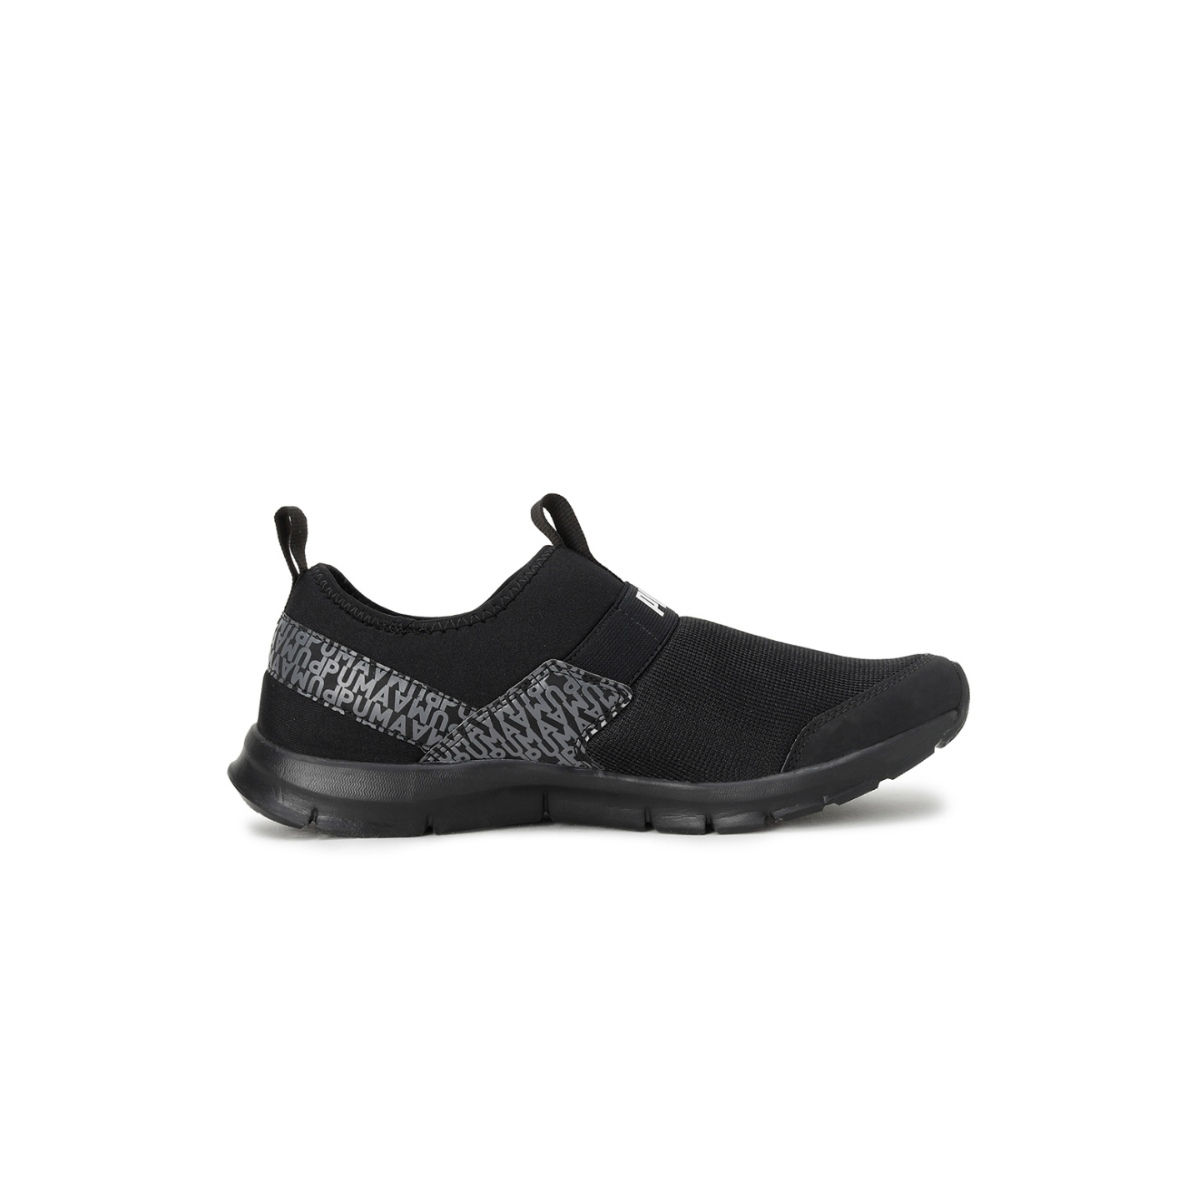 PUMA Electrify Nitro 3 Knit sneakers in black and peach | ASOS